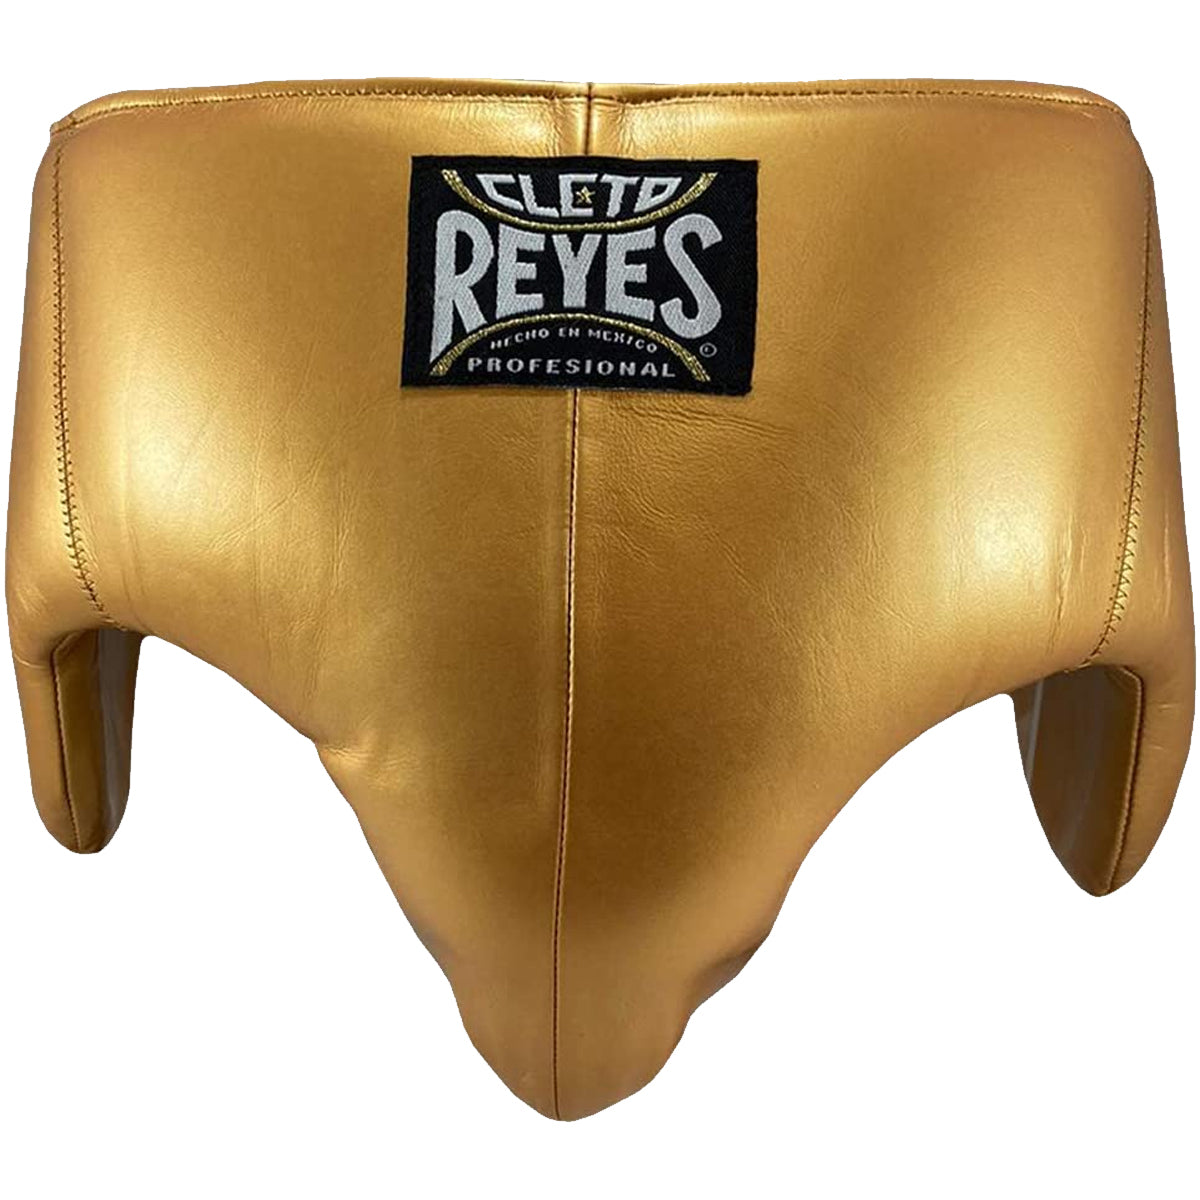 Cleto Reyes Kidney and Foul Padded Protective Cup - Large - Solid Gold Cleto Reyes